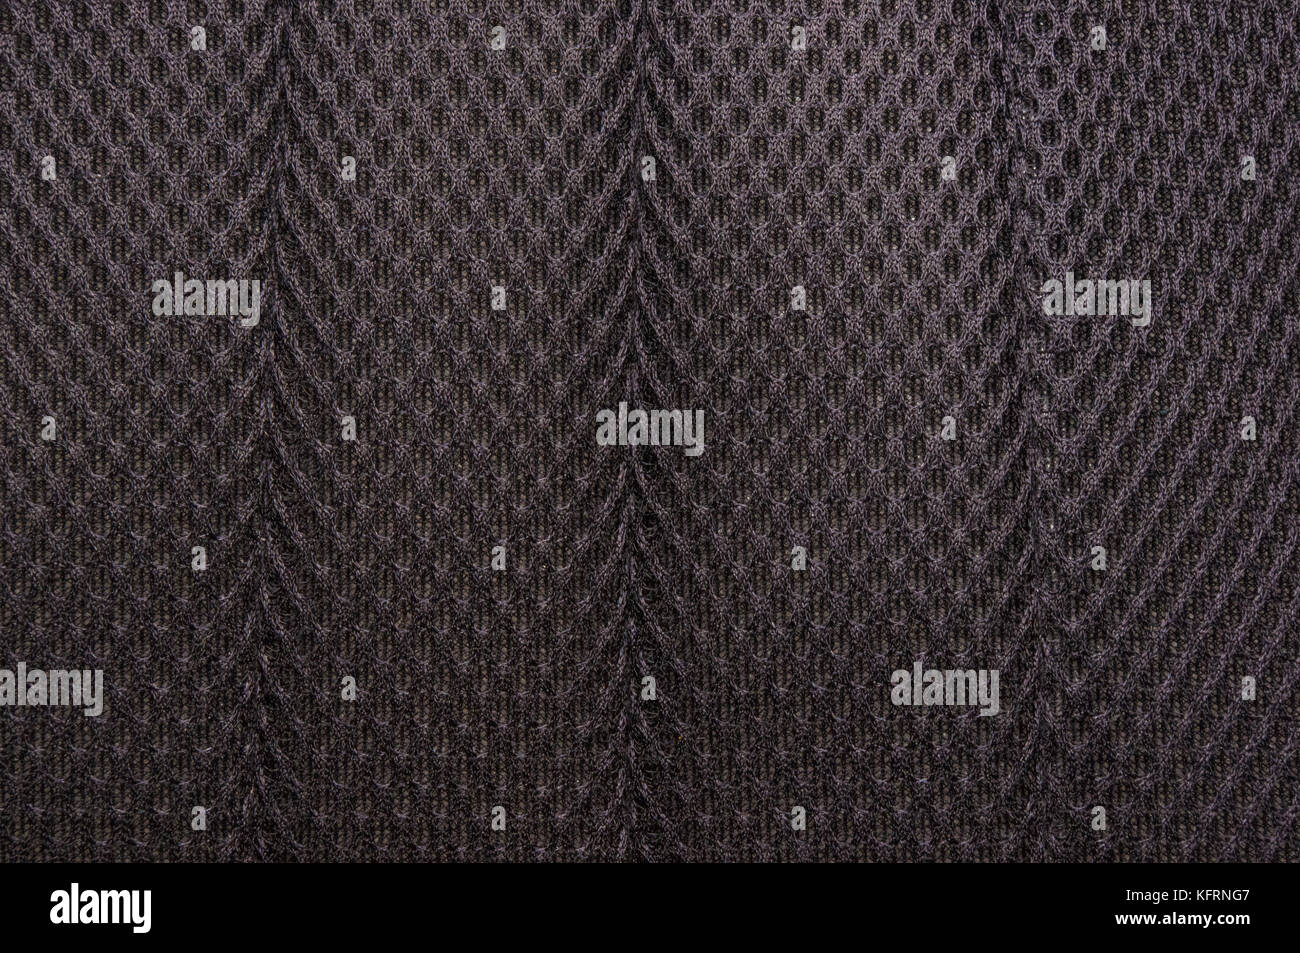 Fabric Mesh Images – Browse 291,487 Stock Photos, Vectors, and